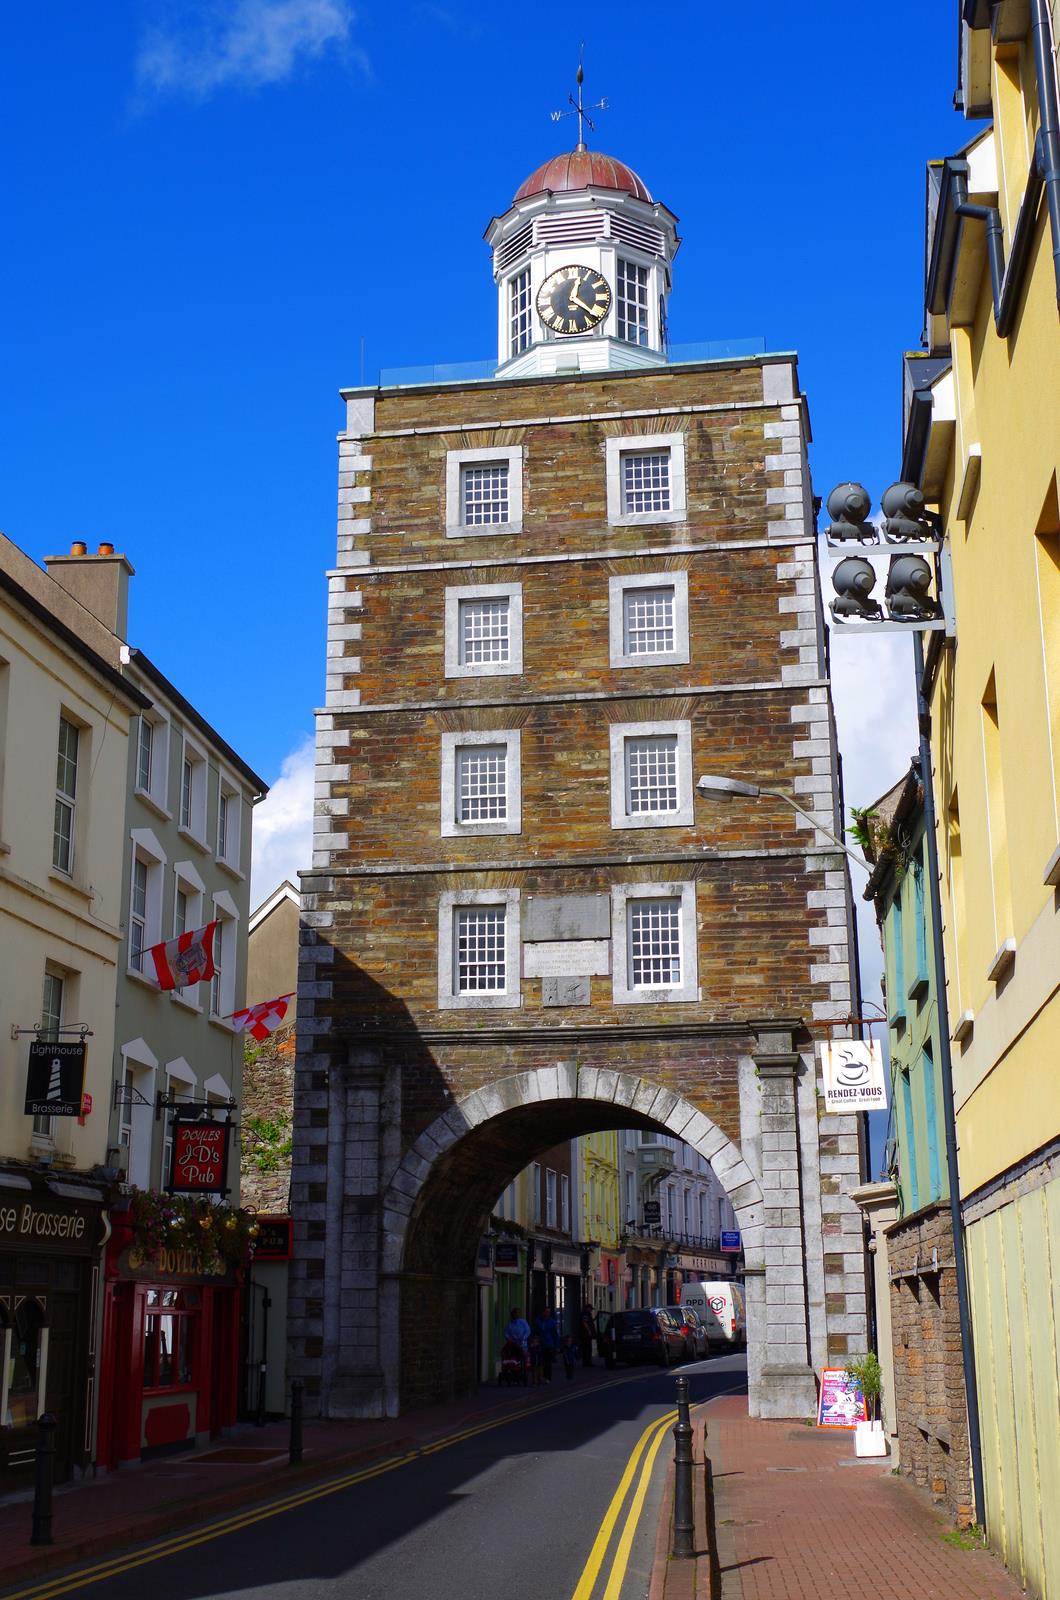 Youghal Iconic Clock Tower